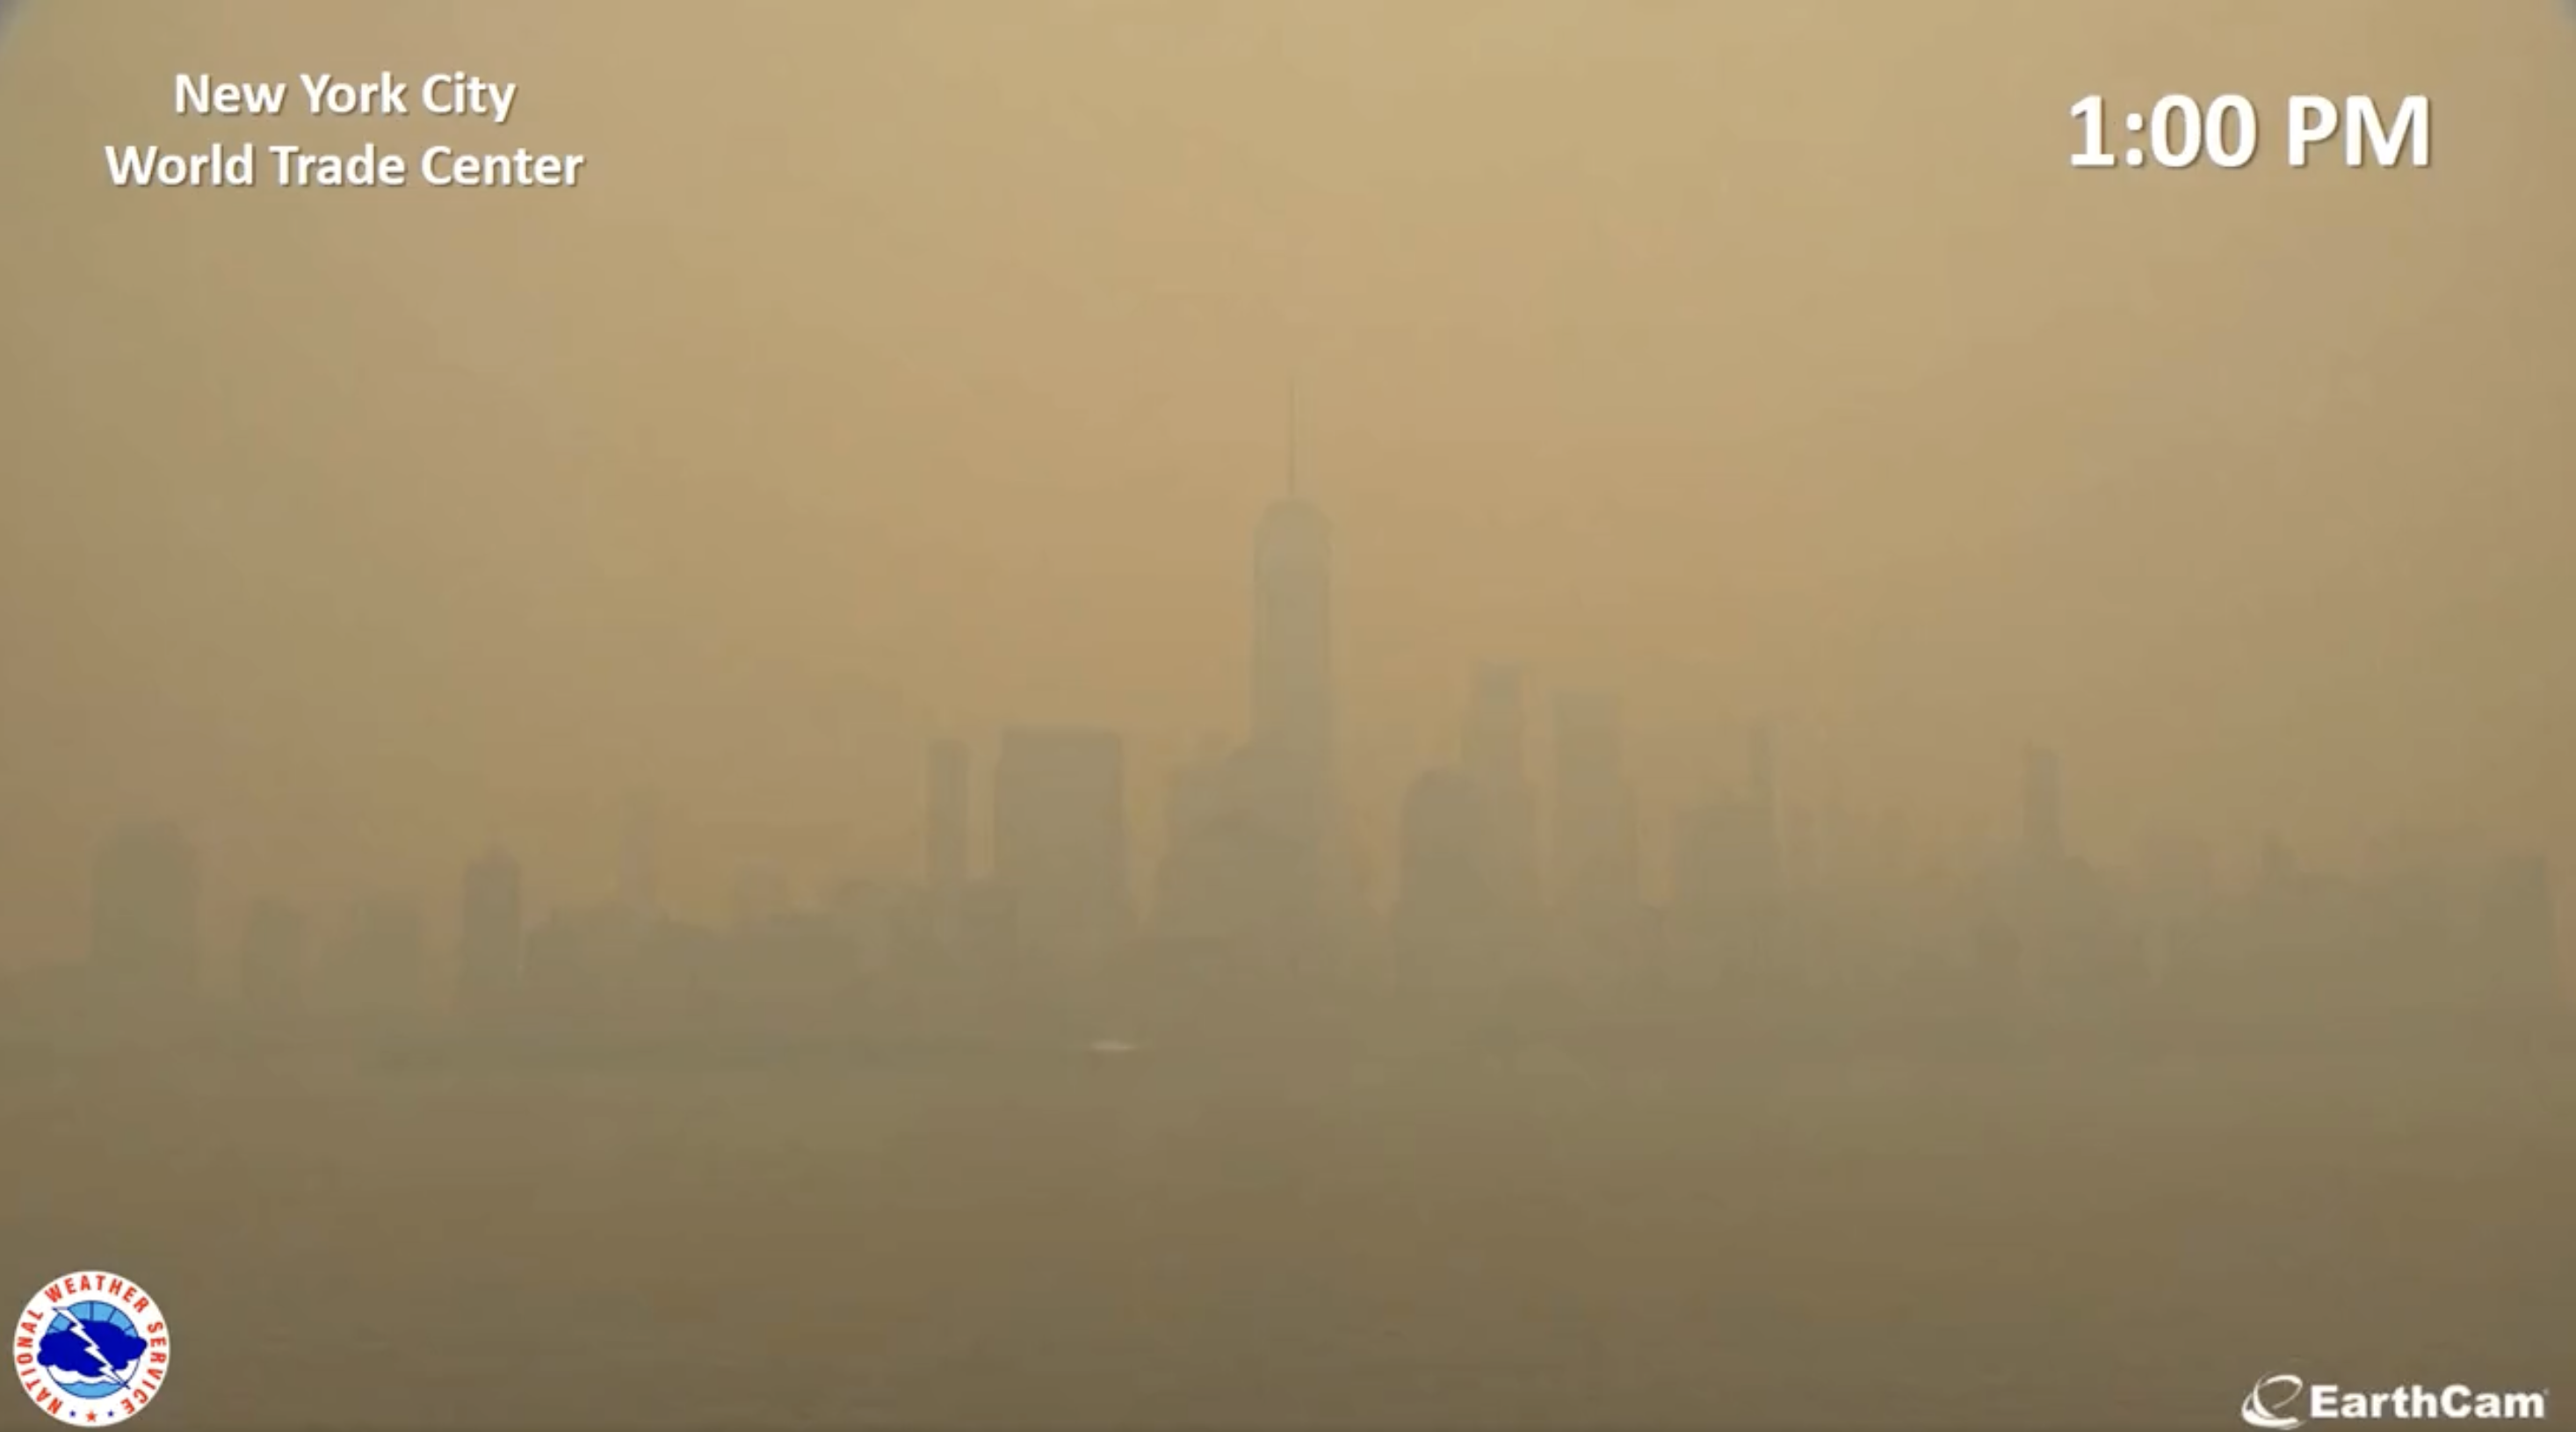 View of the downtown Manhattan skyline at 1 pm, with the sky a deeper orange